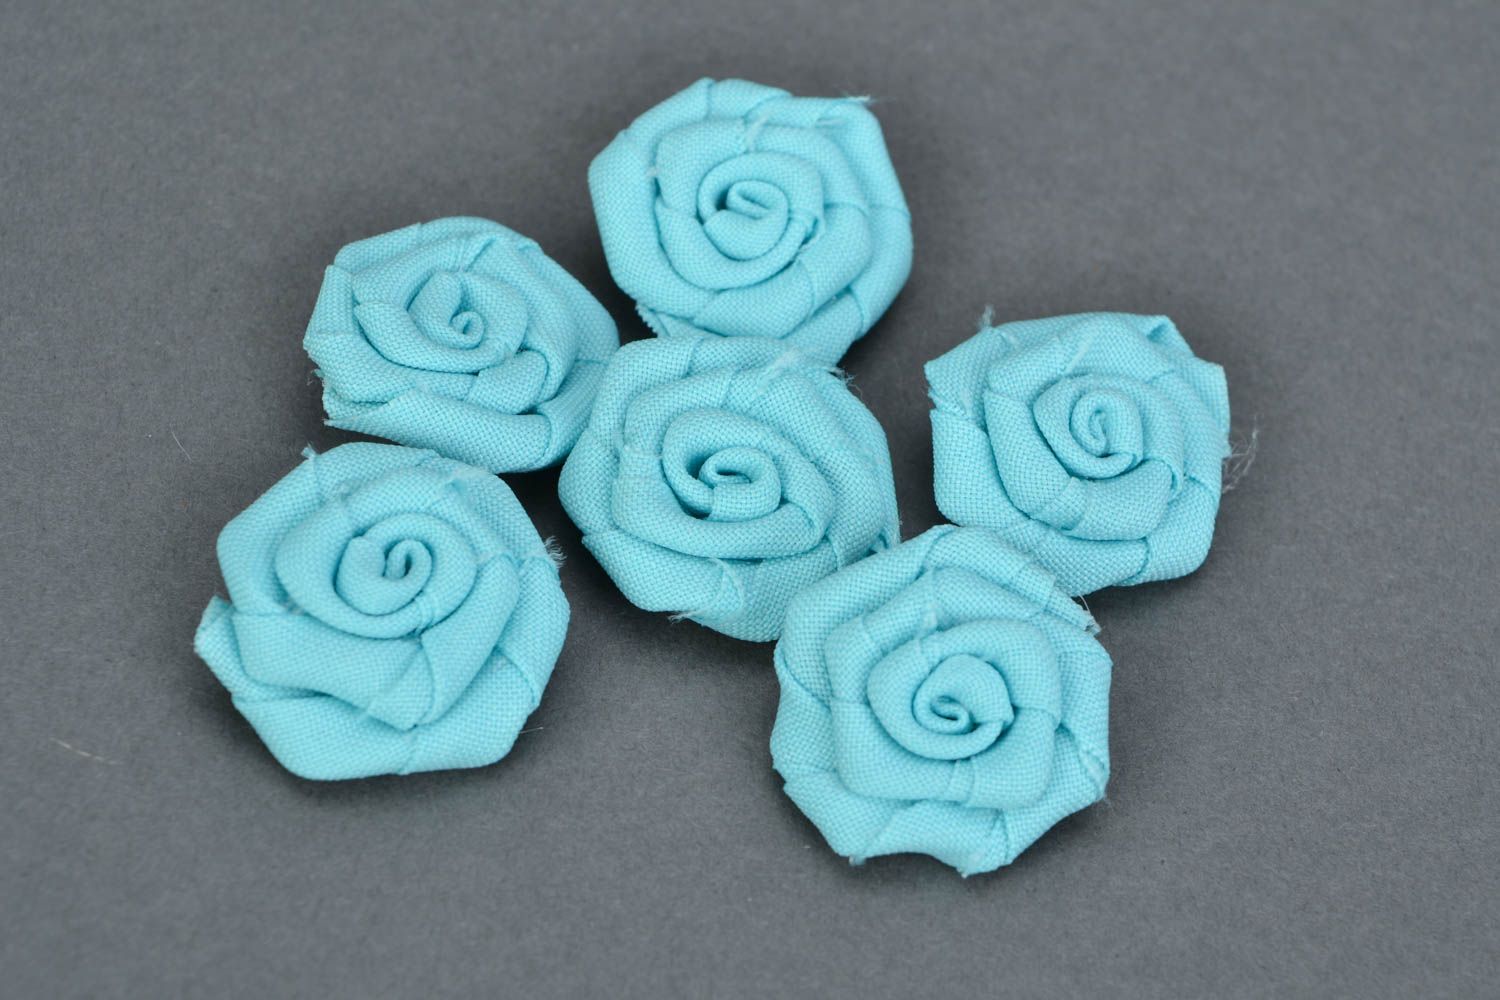 Set of 6 small light blue handmade fabric rose flowers for jewelry making photo 1